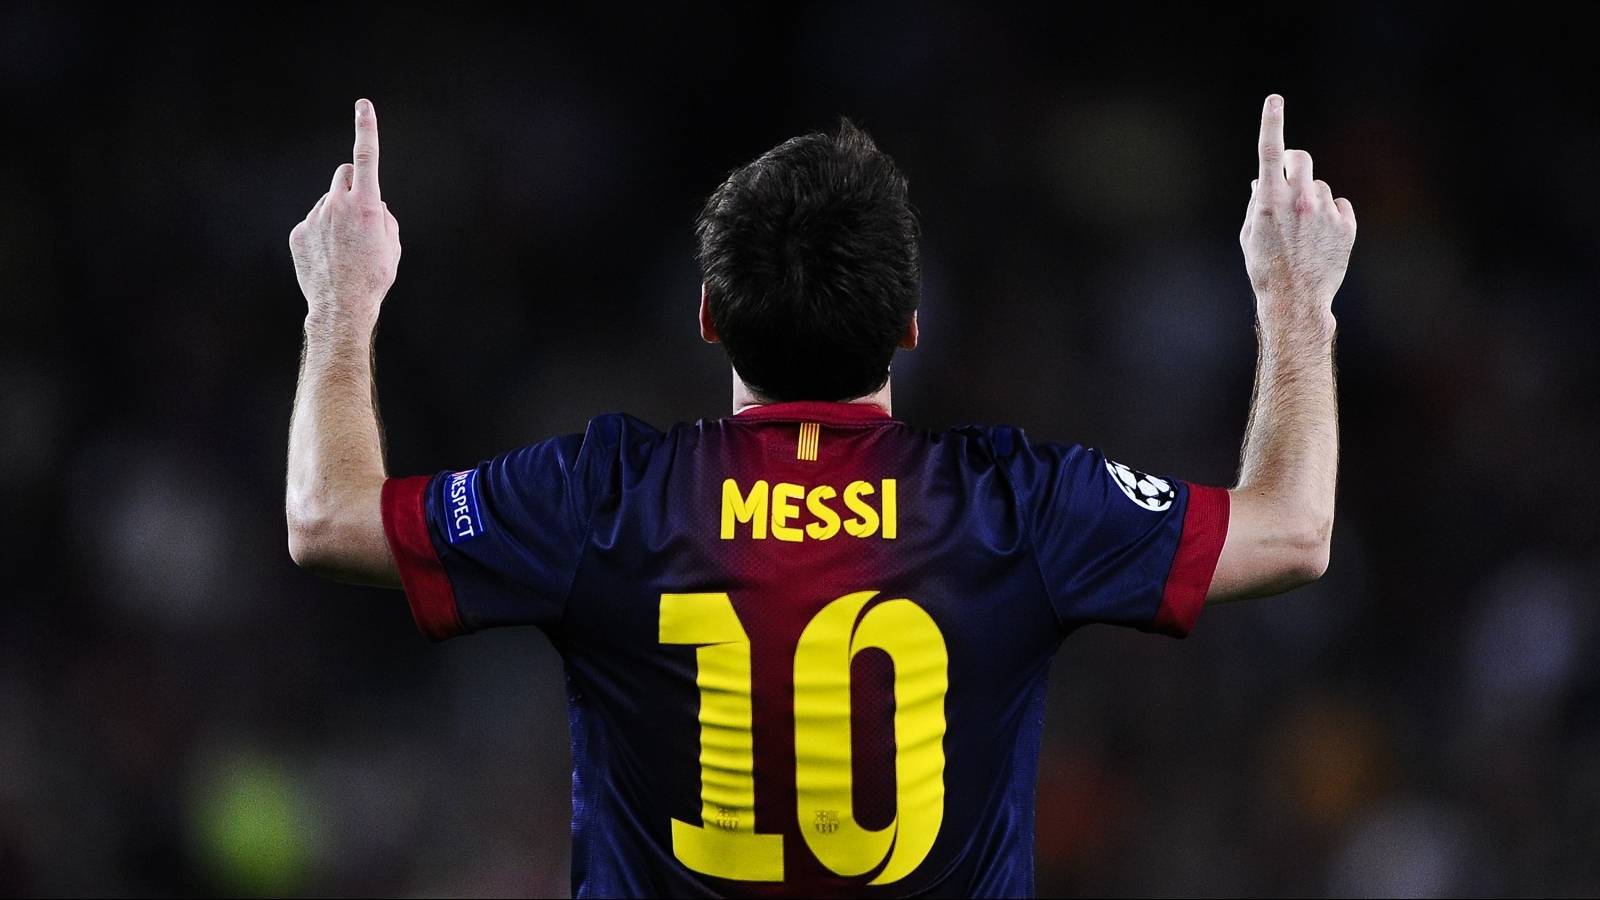 lionel andres messi, people, men, sports, football, black